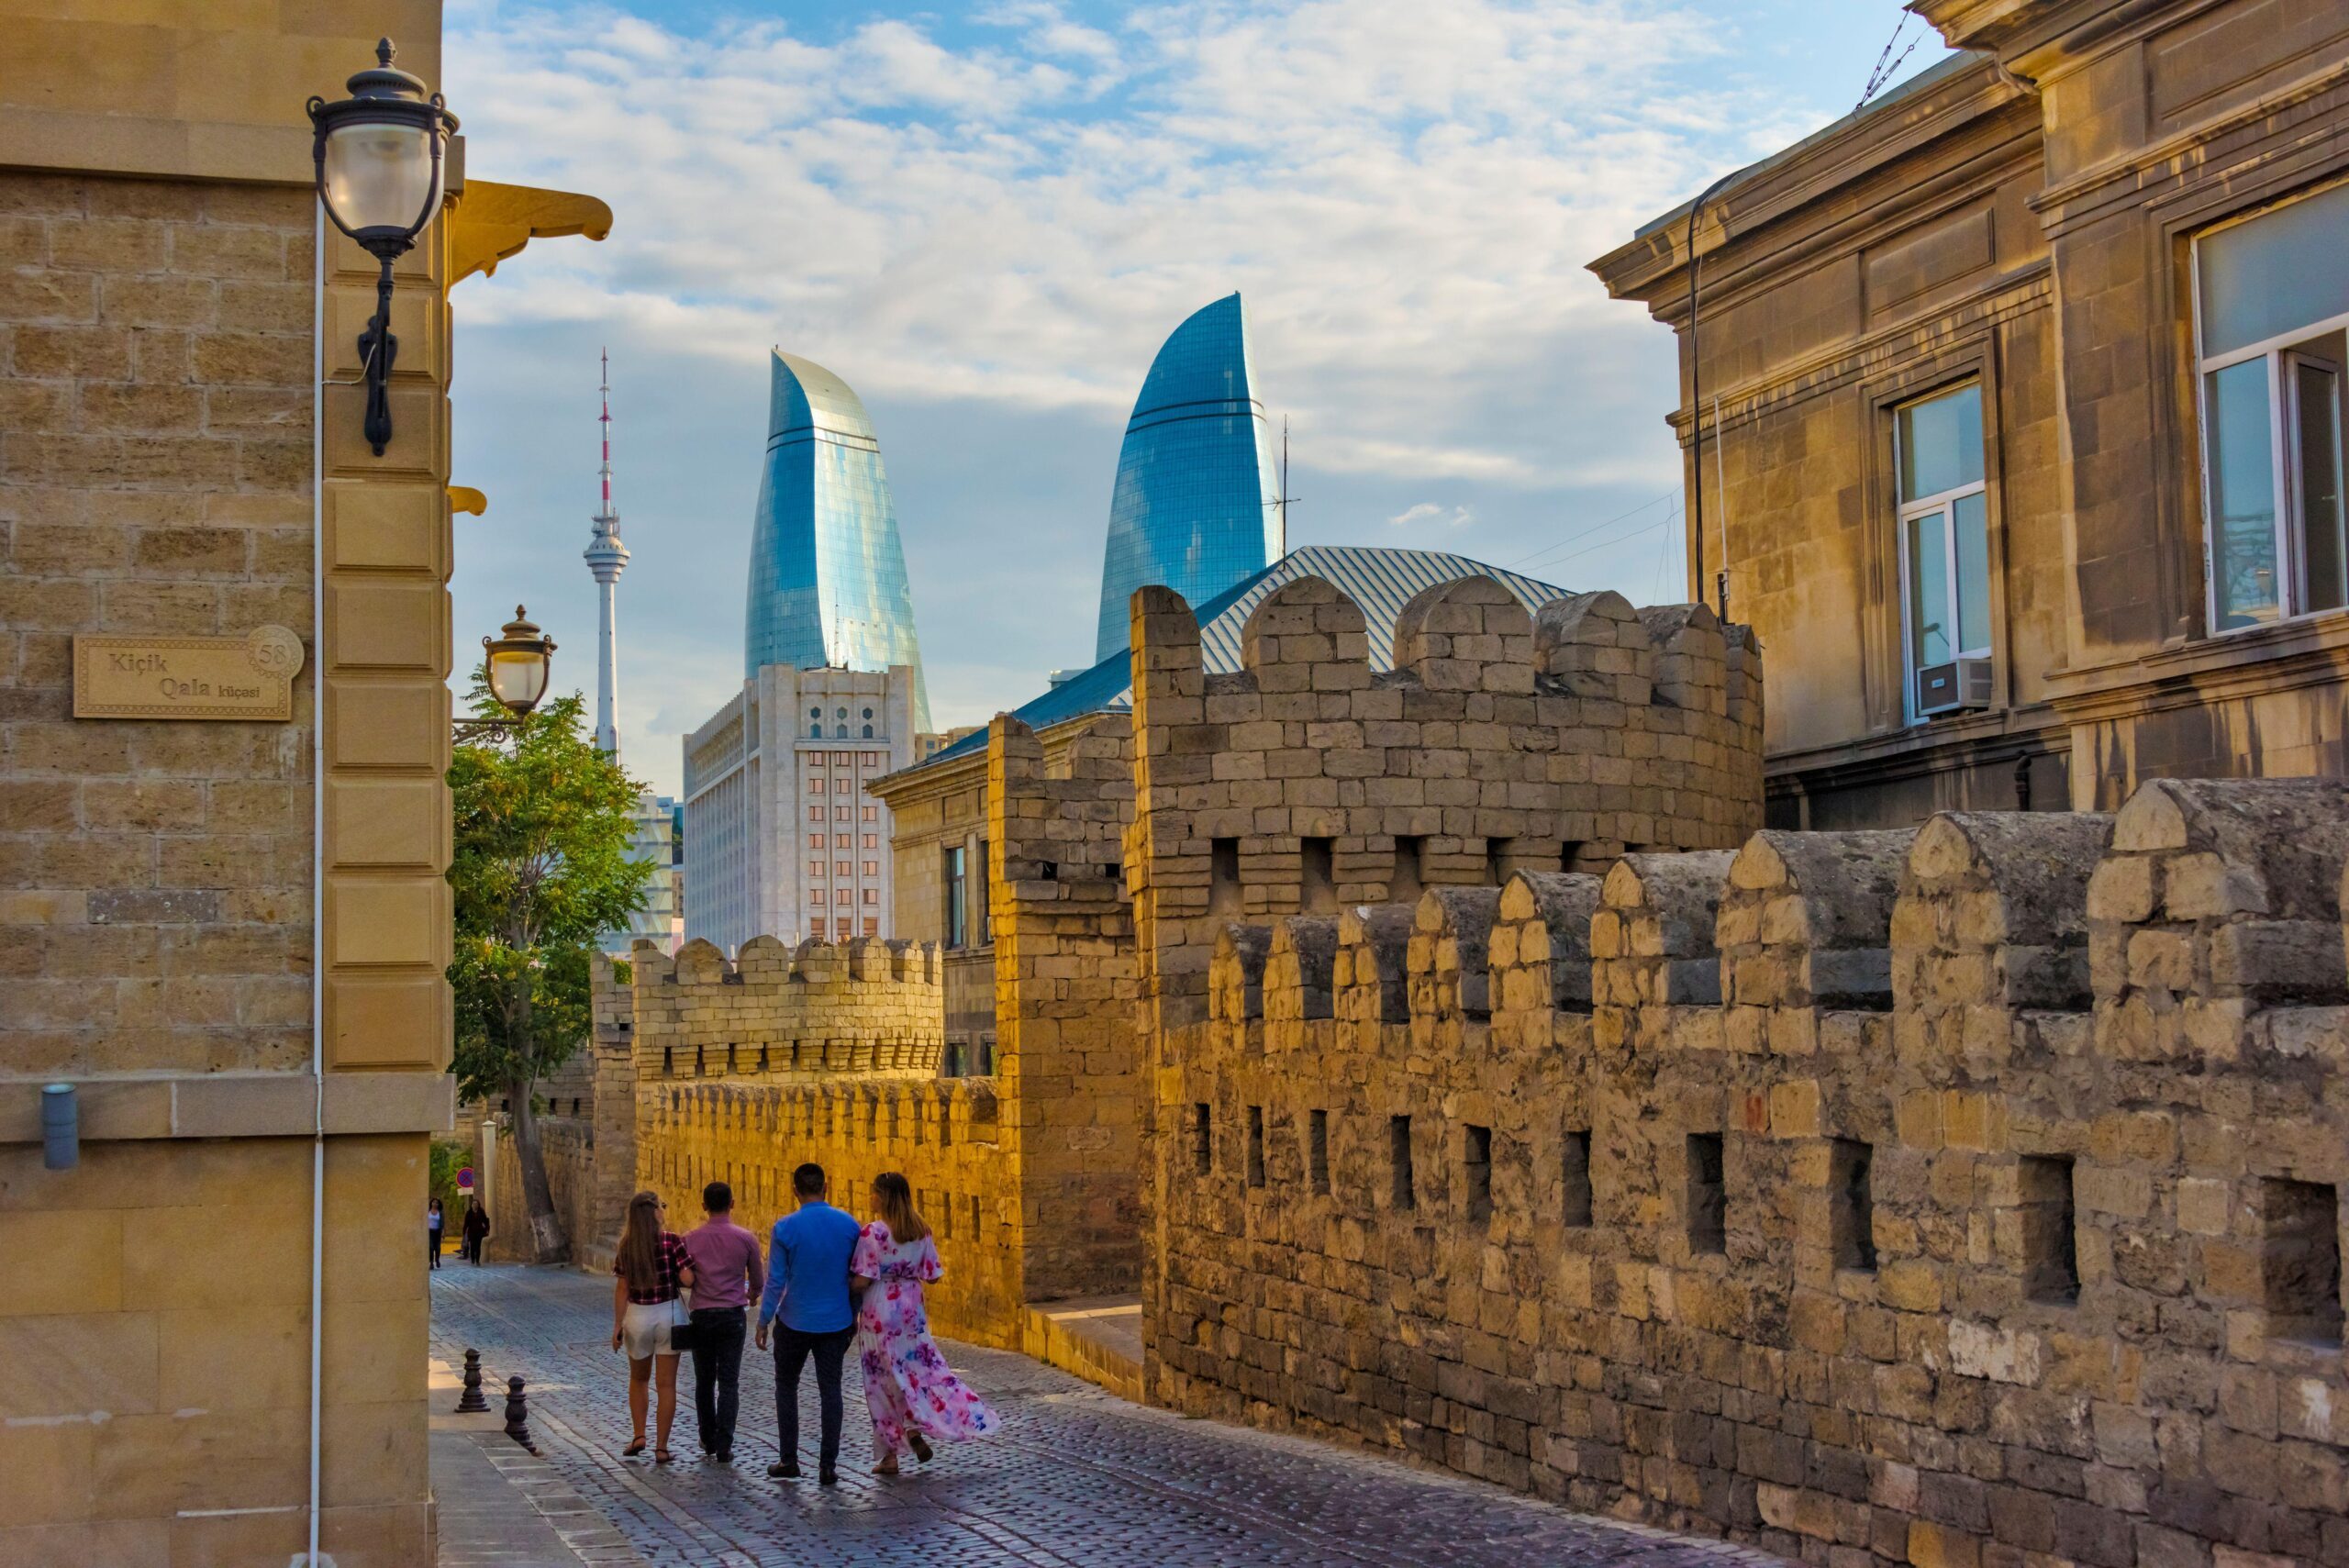 Baku's old architecture and strikingly modern Flame Towers give the city a unique appeal